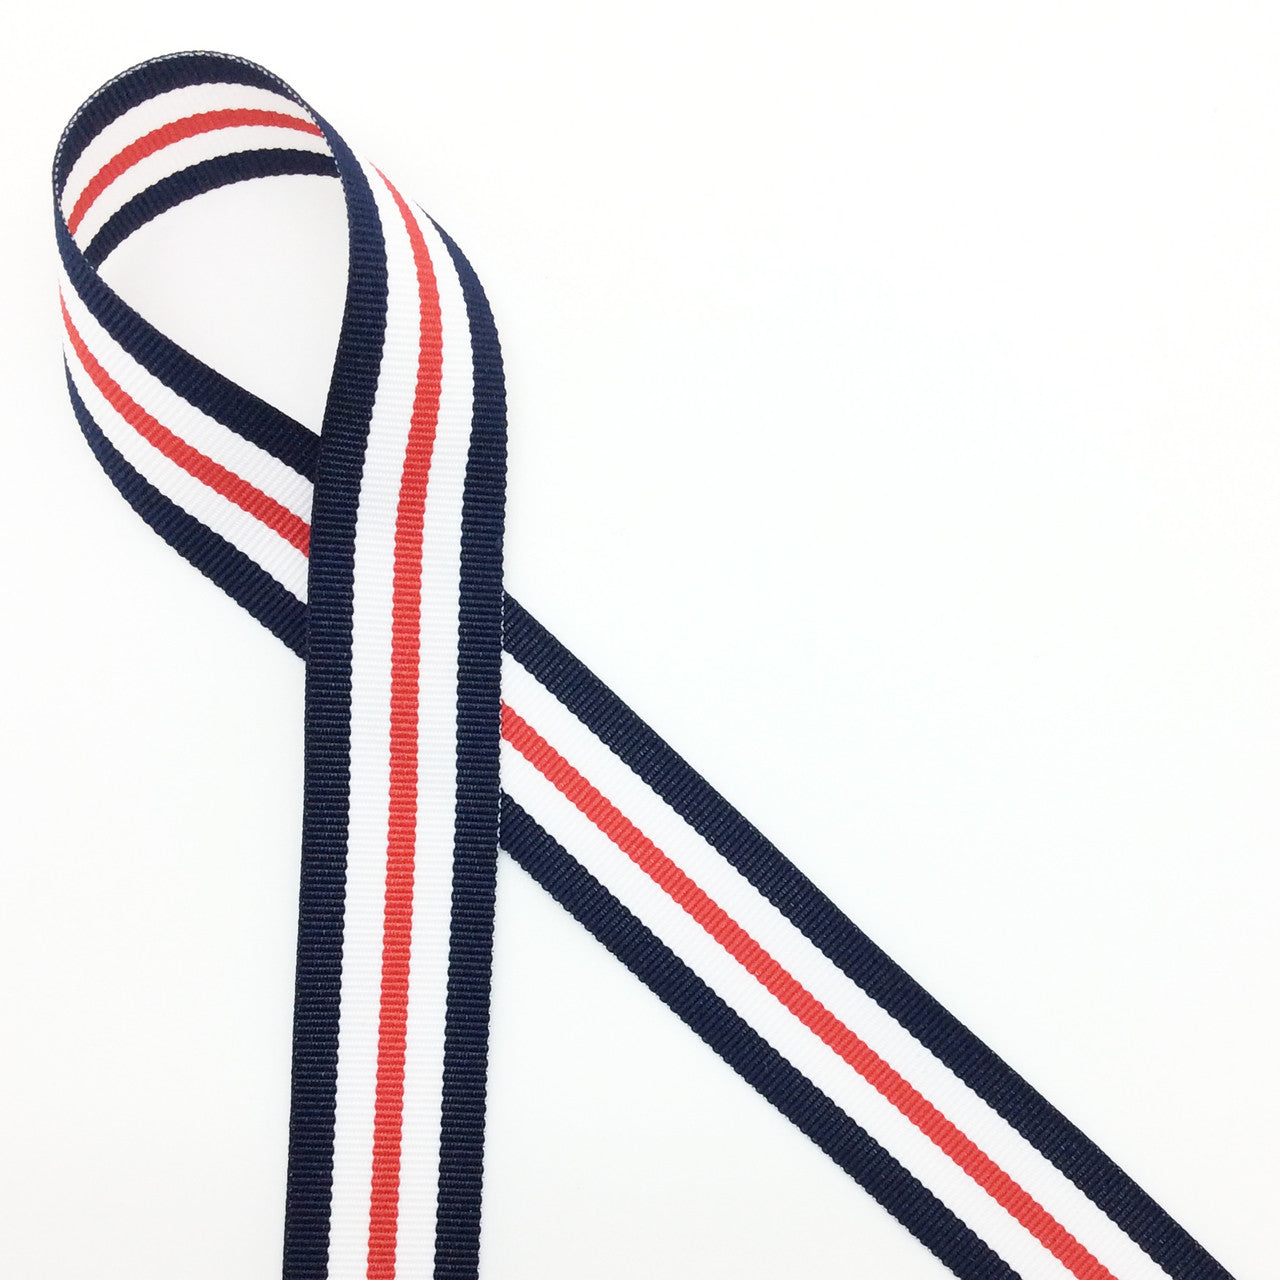 Stripes Ribbon of Red, White, and Navy Blue Woven to 7/8" Grosgrain Ribbon